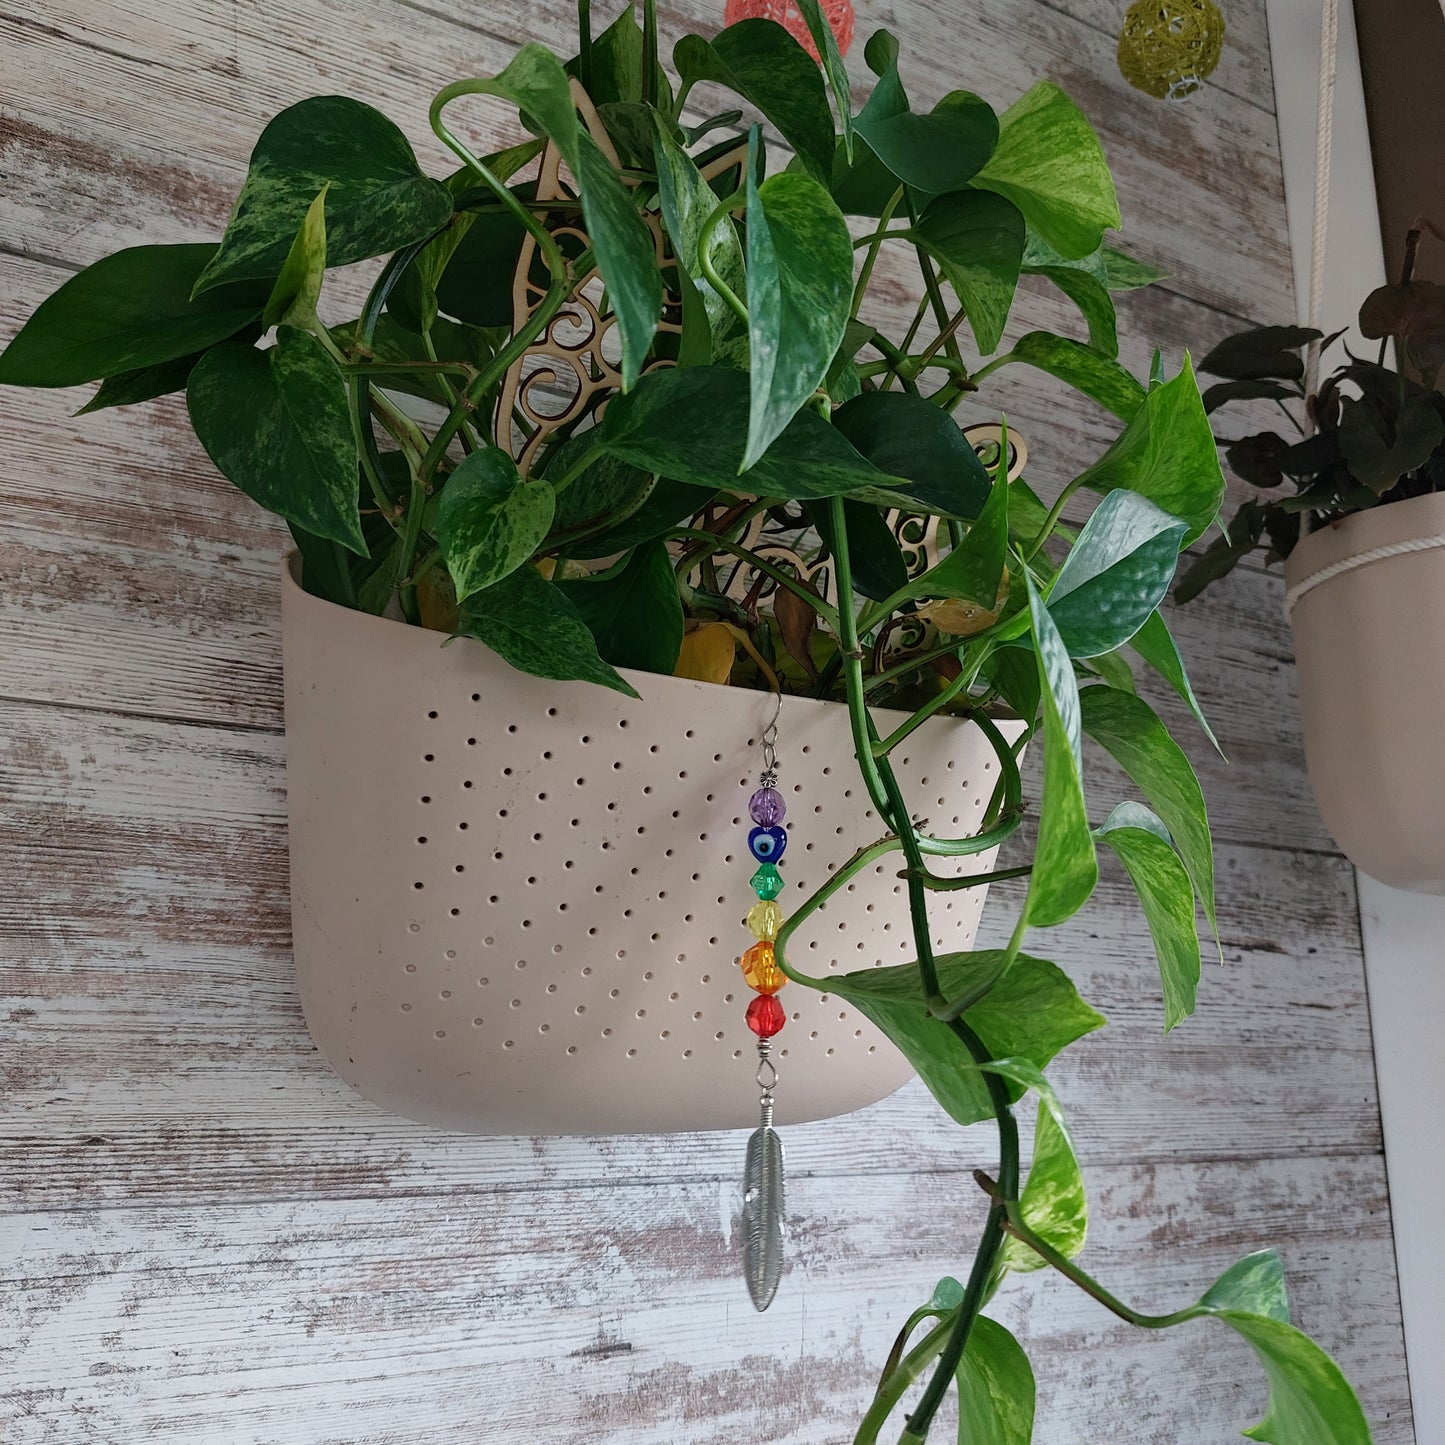 Rainbow flower pot bling with evil eye and feather charm | window hanging, wall decor, car charm, fan/light pull, ornament- whatever you want it to be!